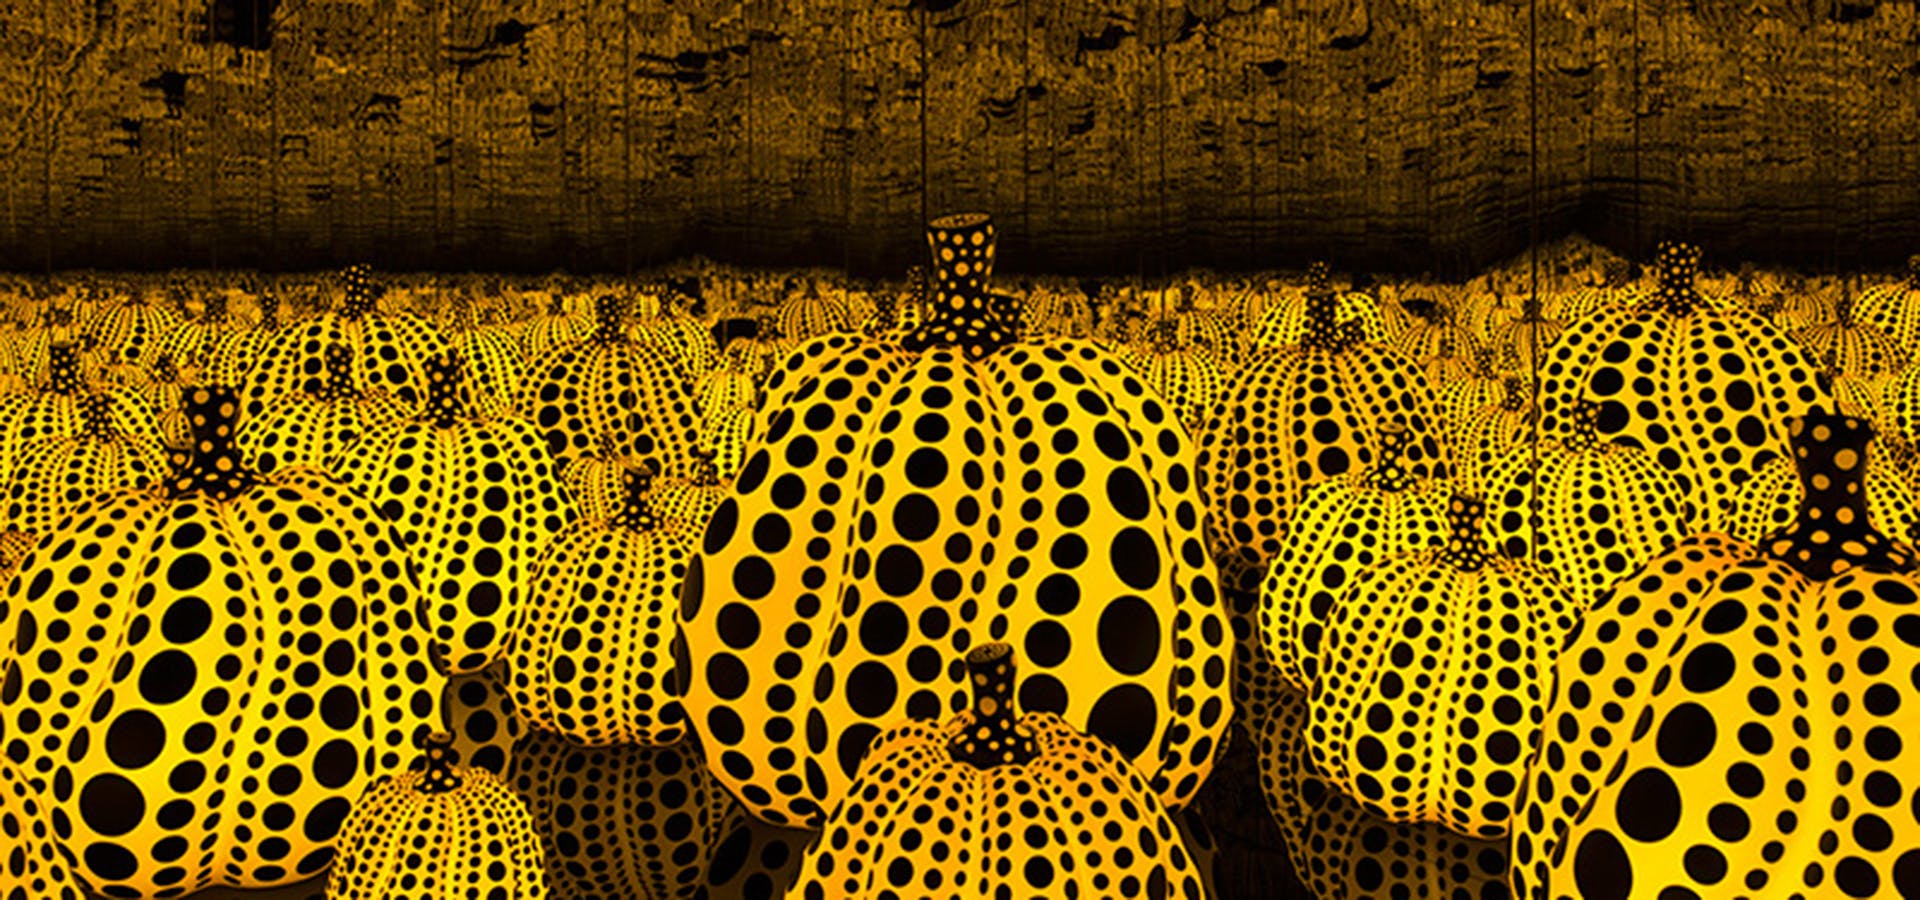 The Hirshhorn's Yayoi Kusama Show Is Extended Through July